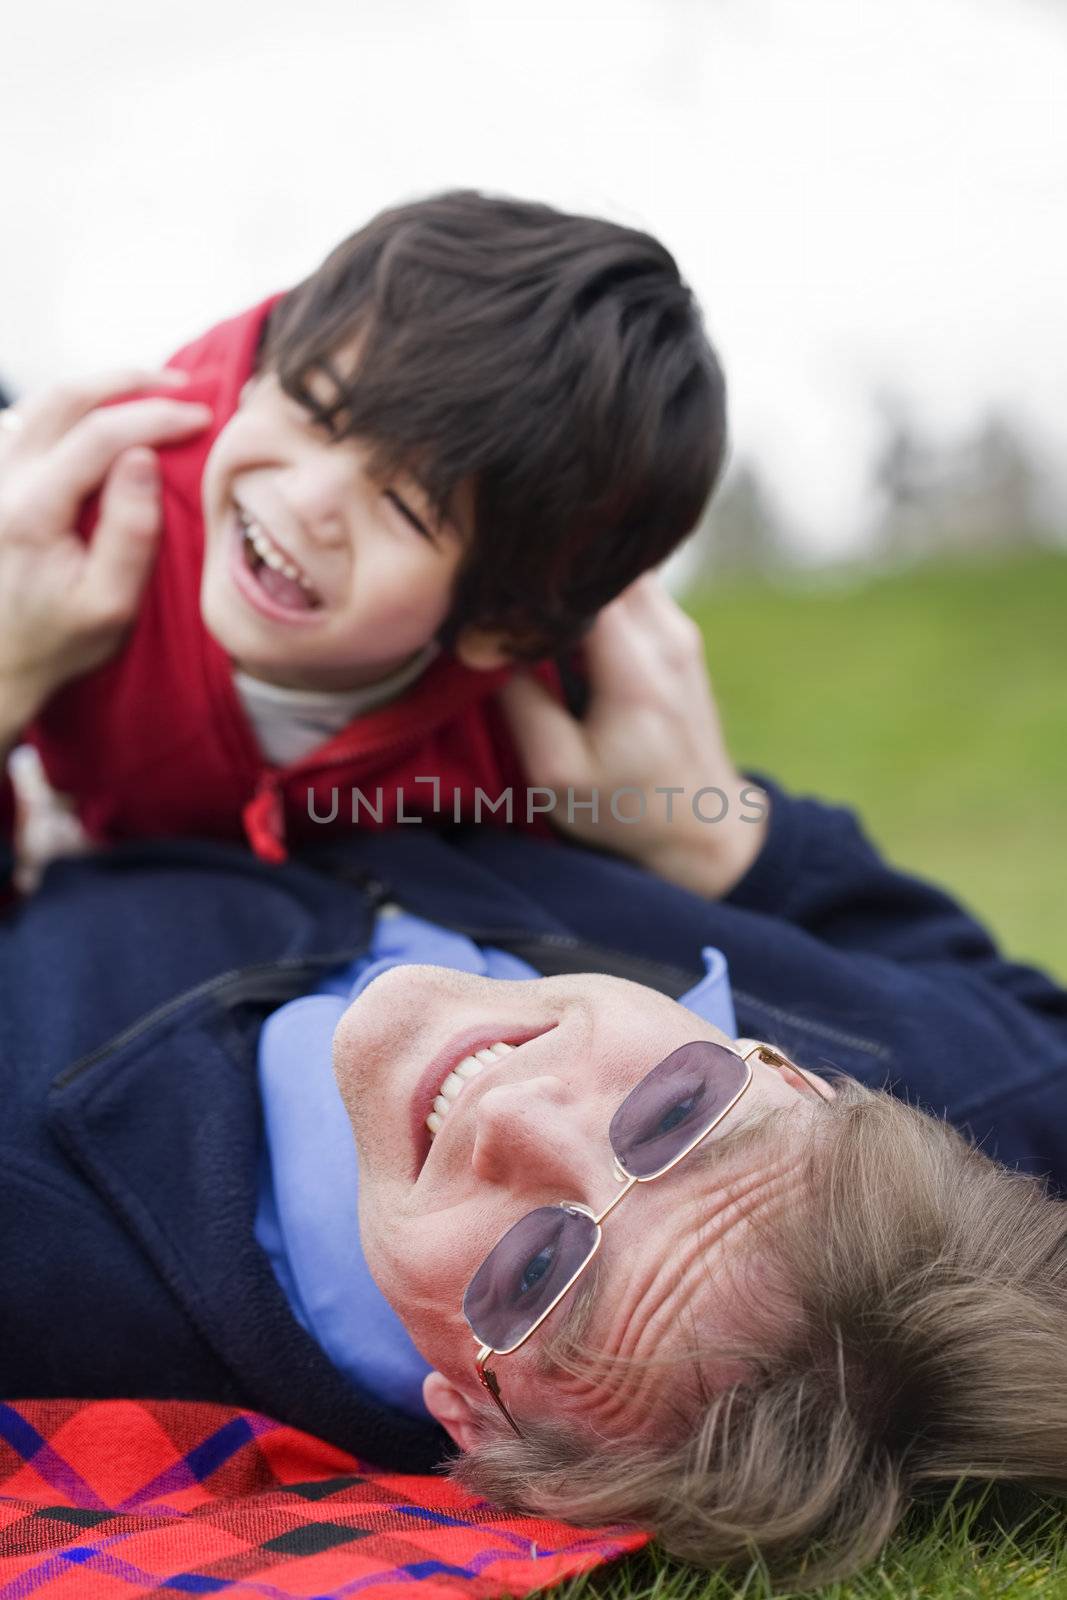 Father playing with disabled son on grass at park by jarenwicklund